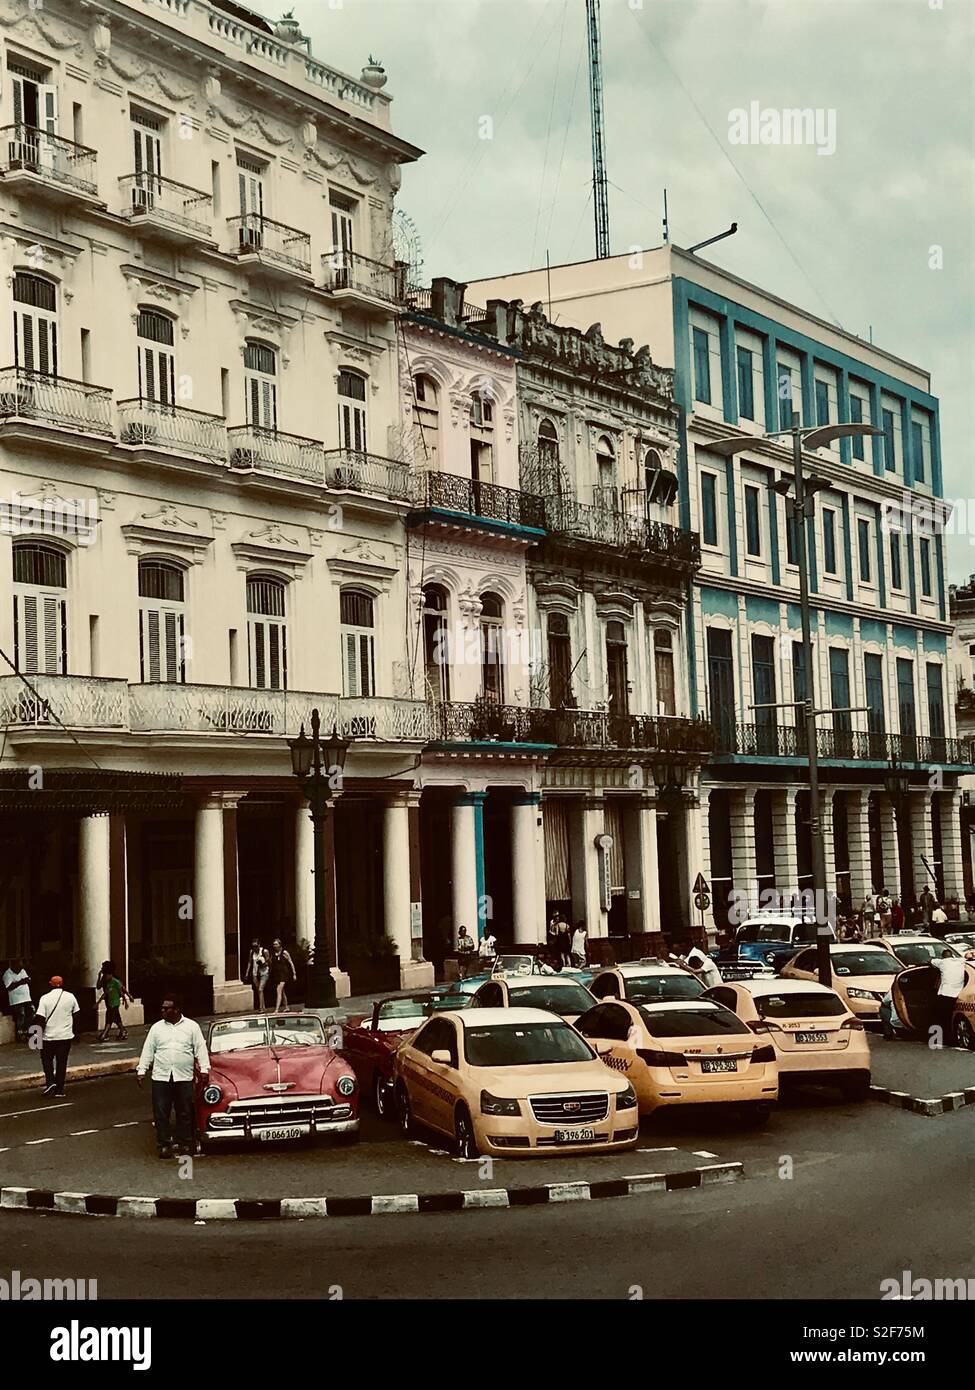 Classic cars and taxi cabs parked outside some beautiful colonial buildings in the centre of Havana Cuba Stock Photo